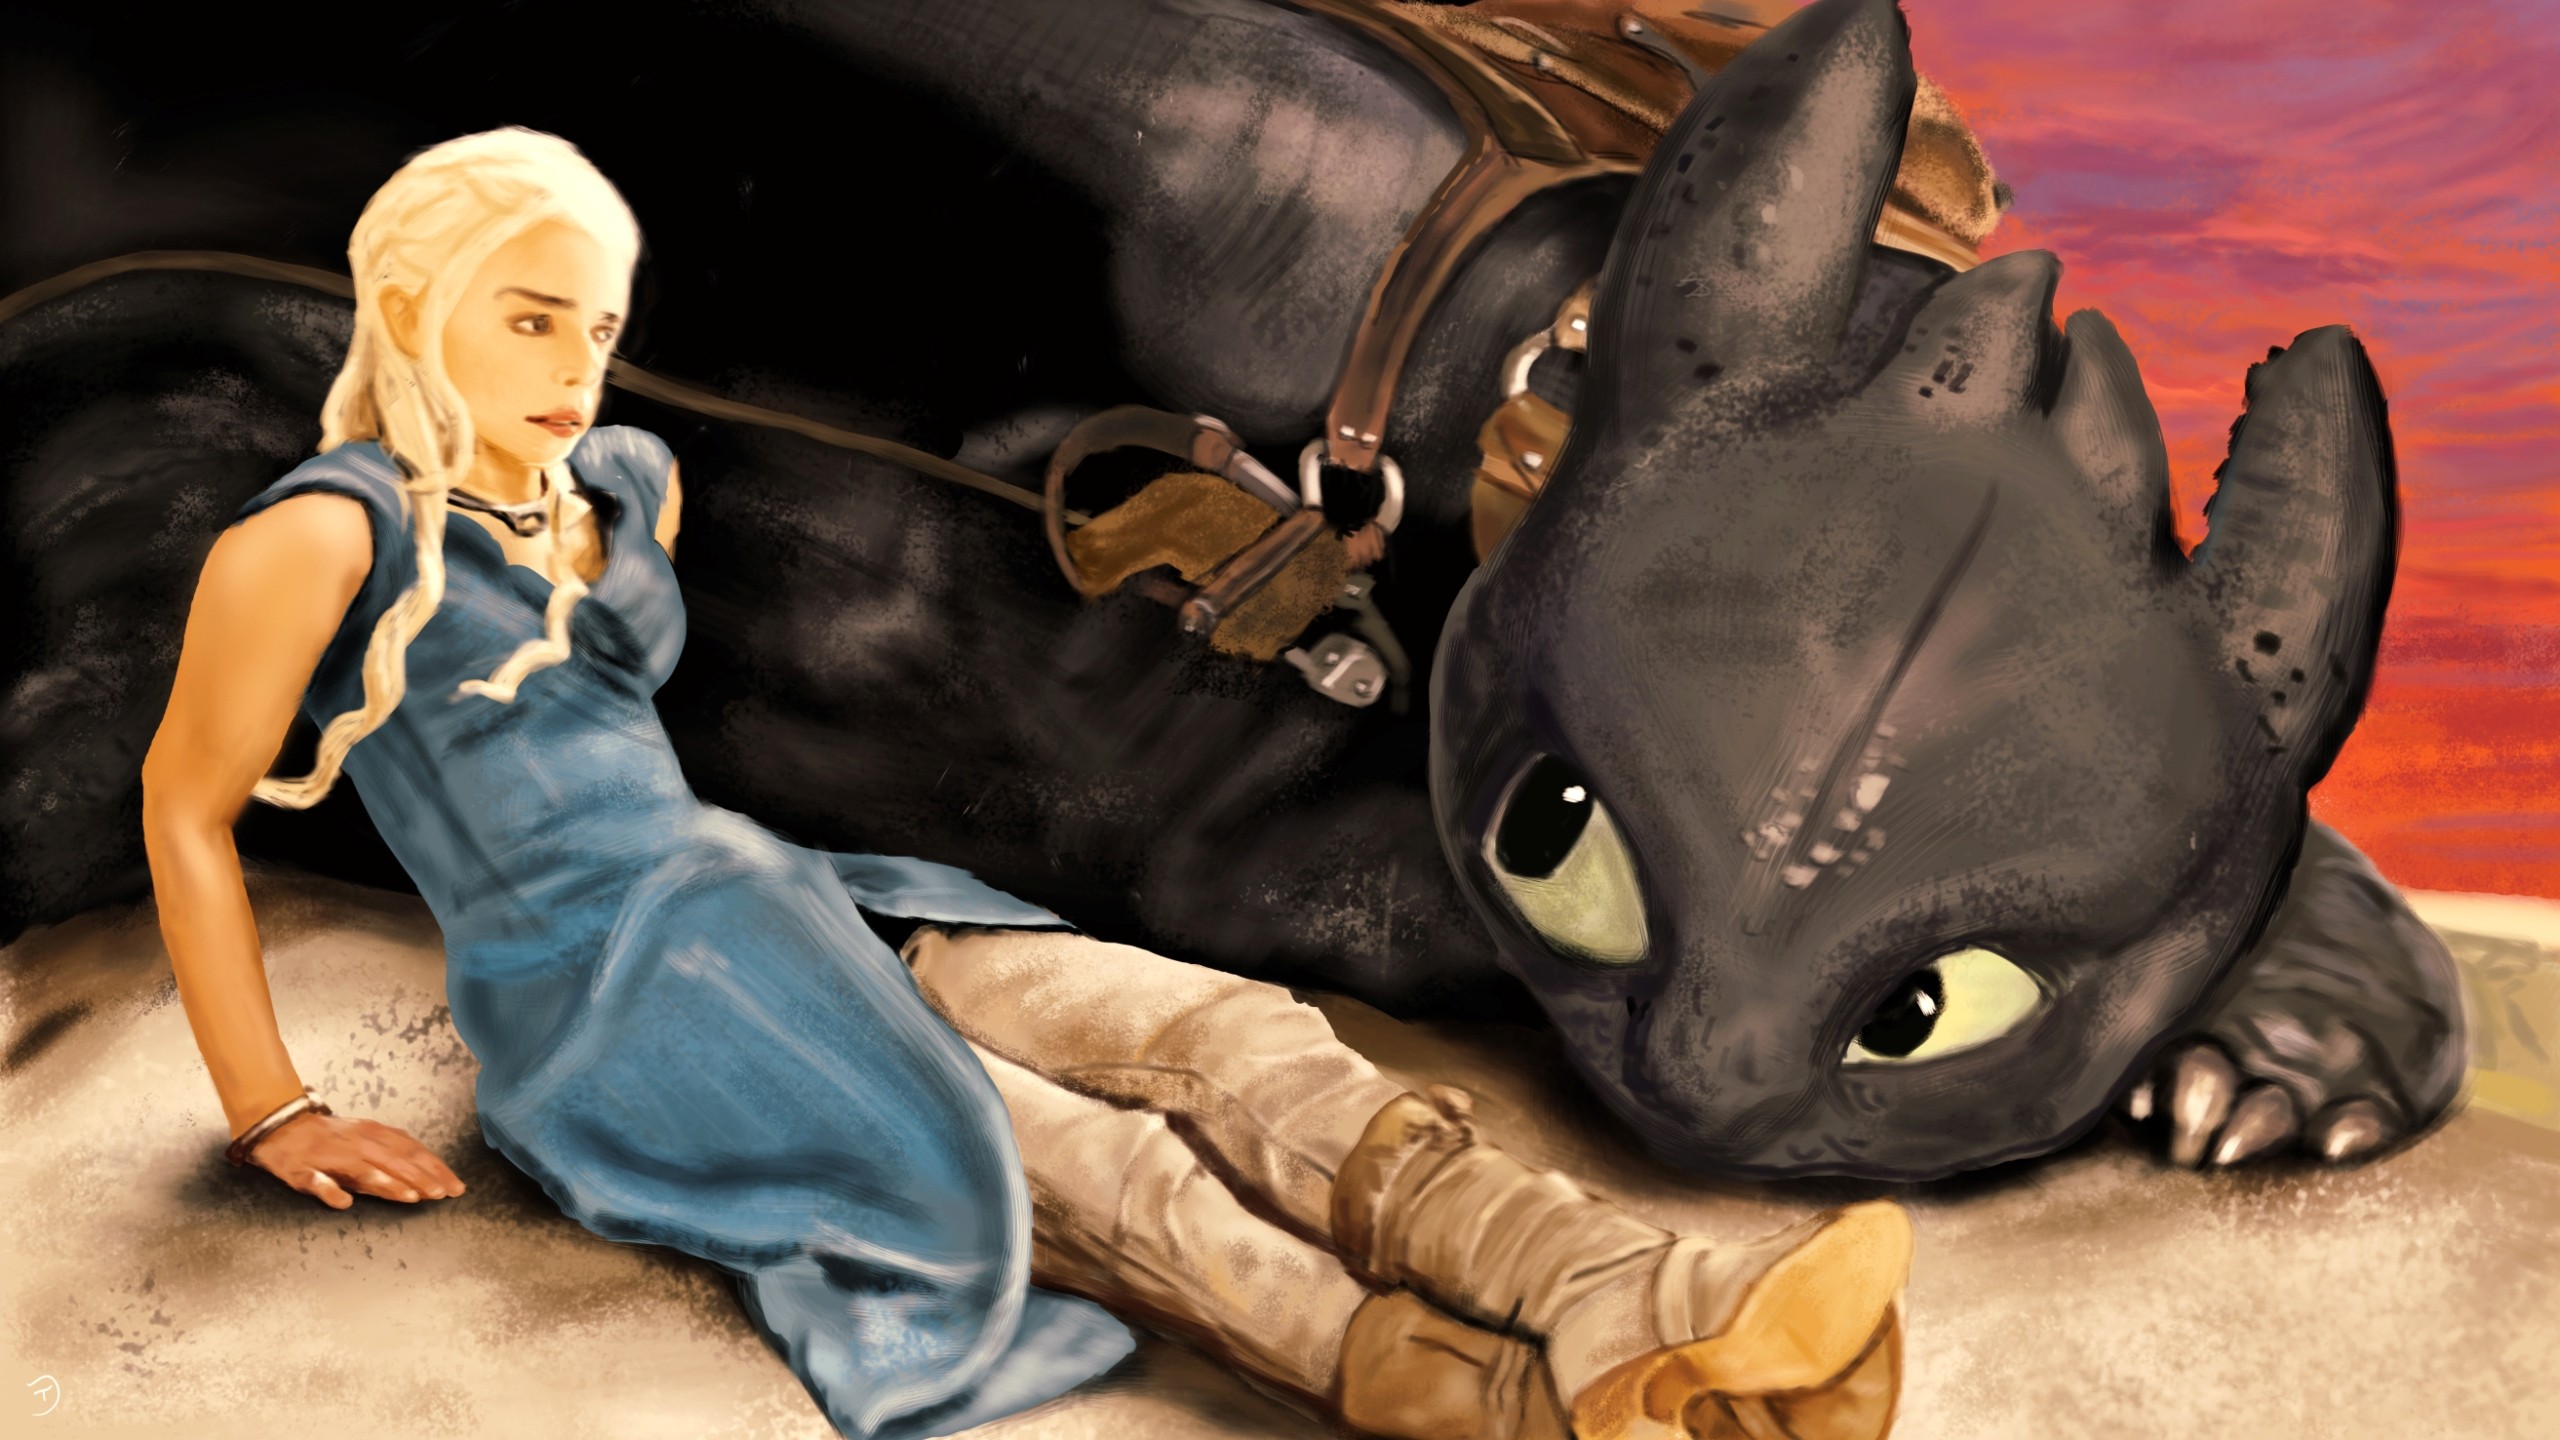 General 2560x1440 Daenerys Targaryen Game of Thrones How to Train Your Dragon fan art Toothless movie characters digital art